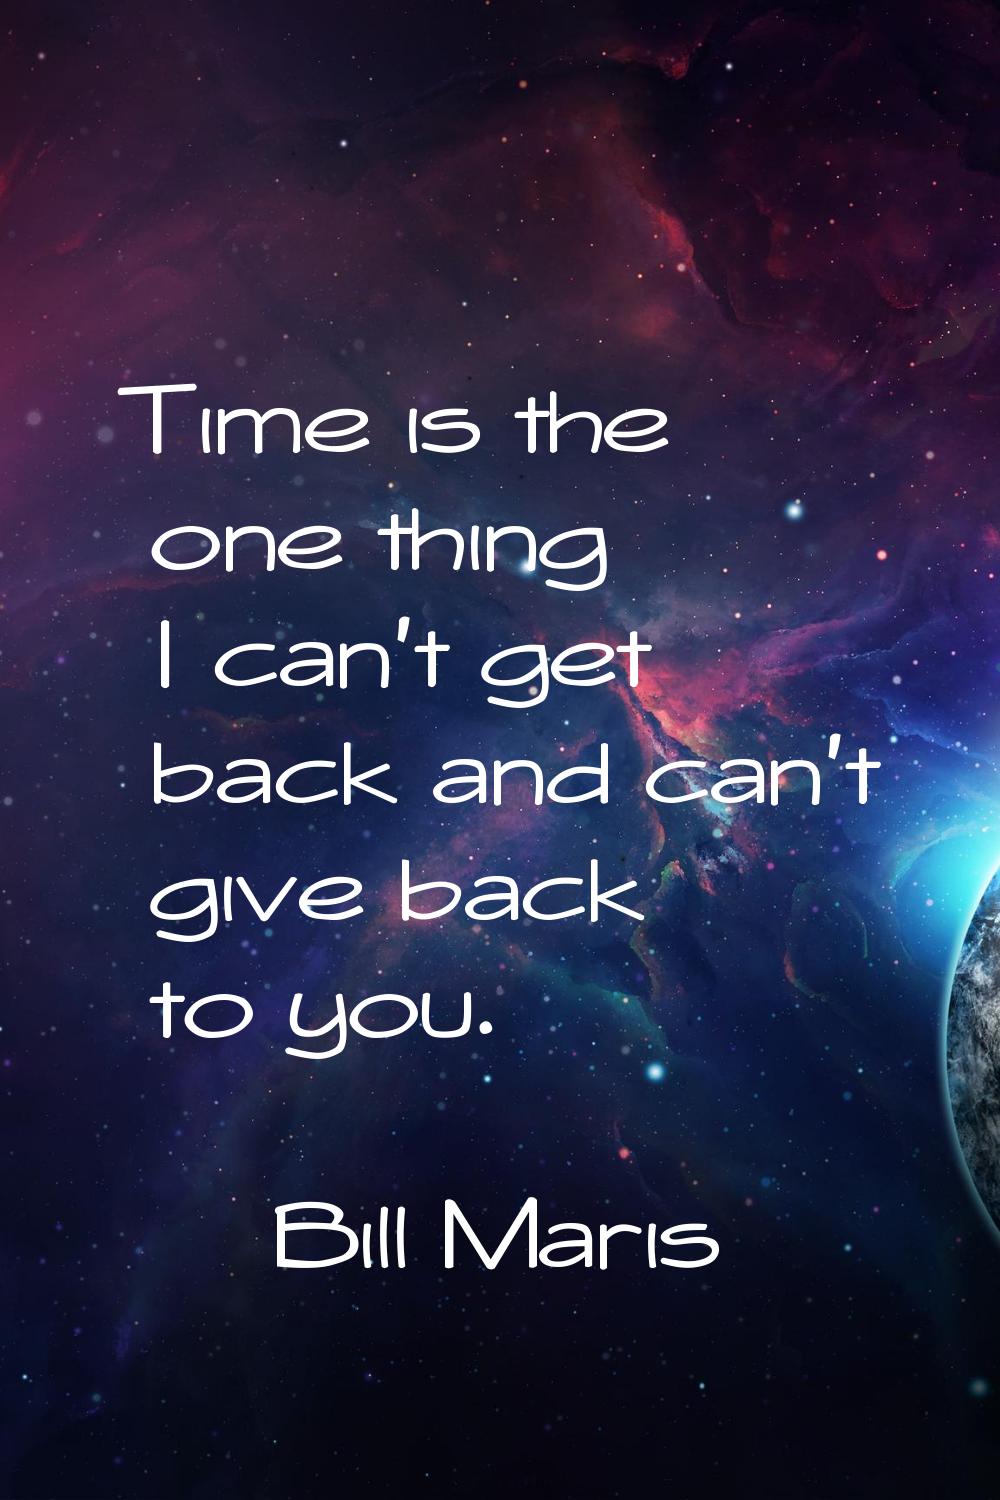 Time is the one thing I can't get back and can't give back to you.